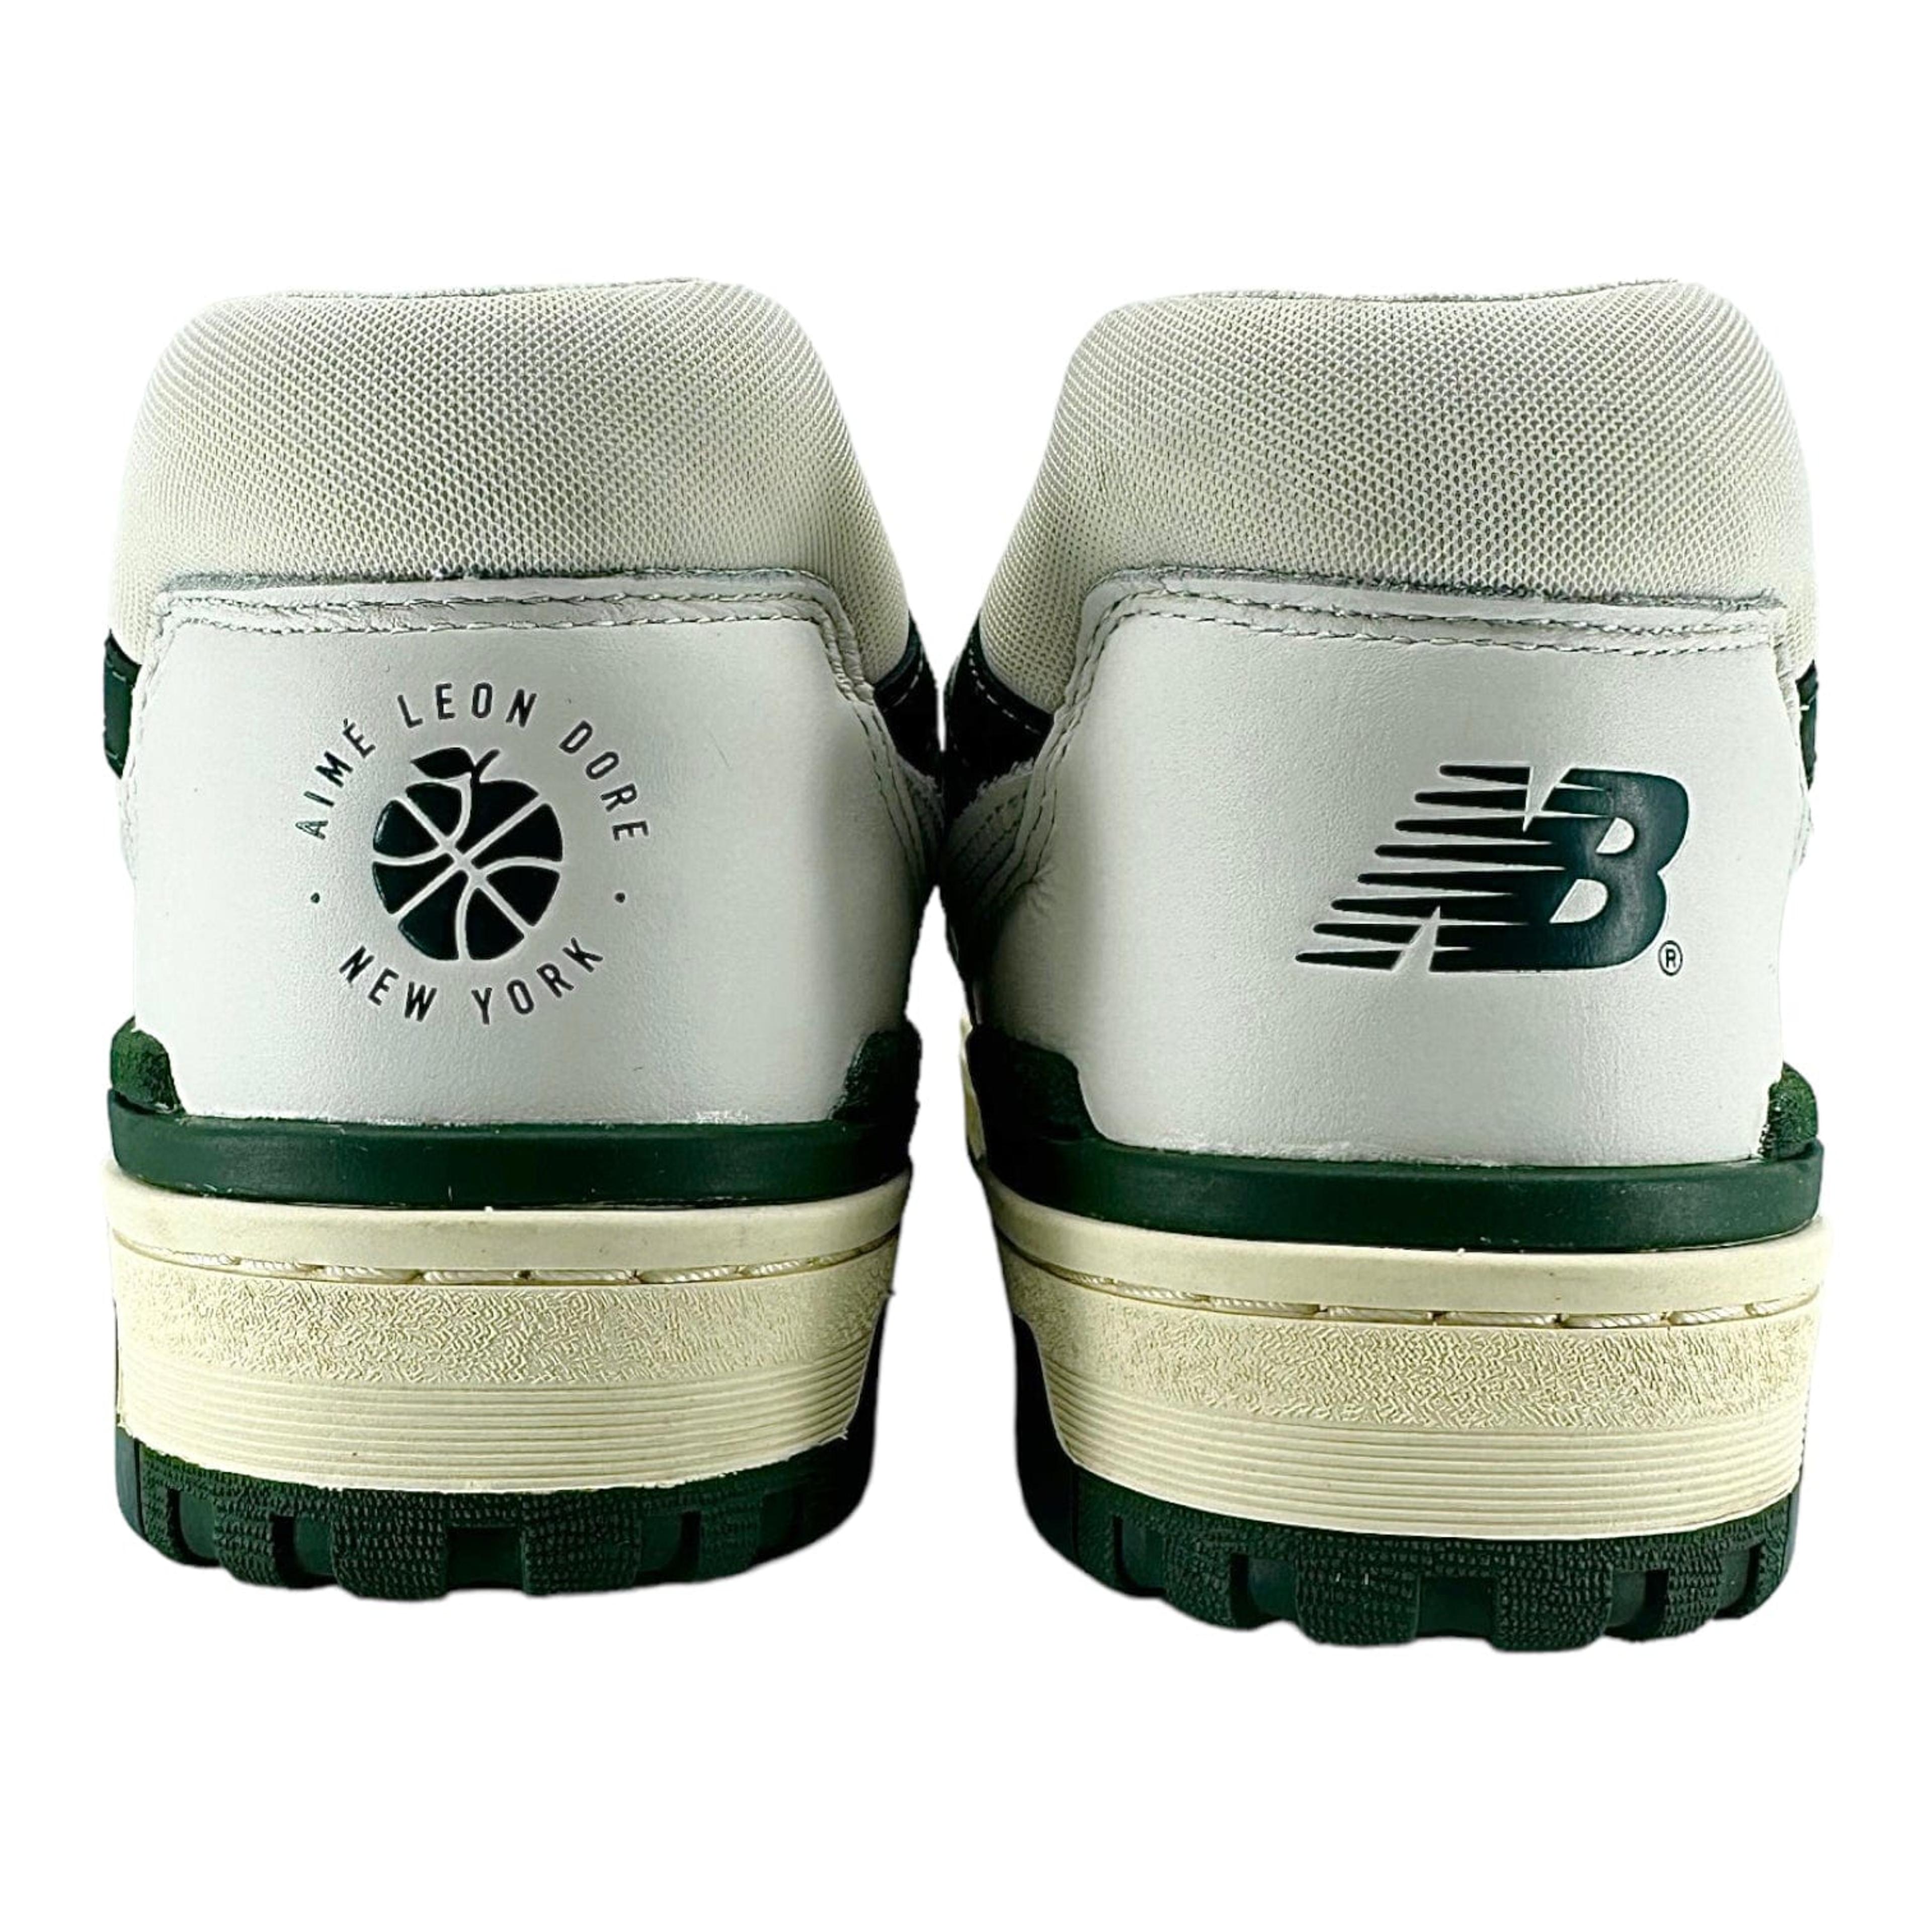 Alternate View 5 of New Balance 550 Aime Leon Dore White Green Pre-Owned